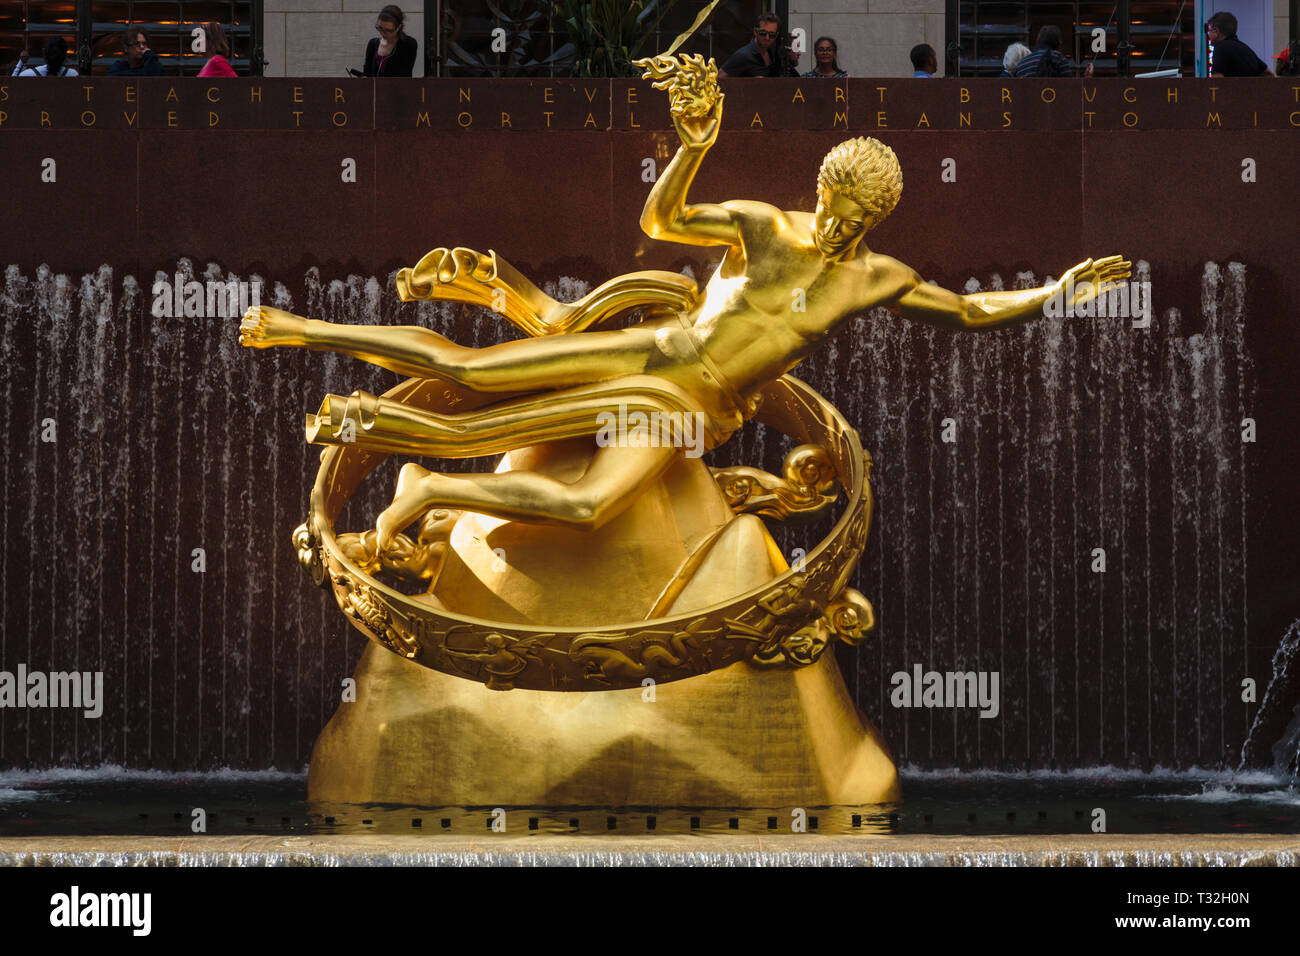 Statue of Prometheus in the lower plaza of the Rockefeller Center, Manhattan, New York, New York State, United States of America.  The gilded bronze s Stock Photo